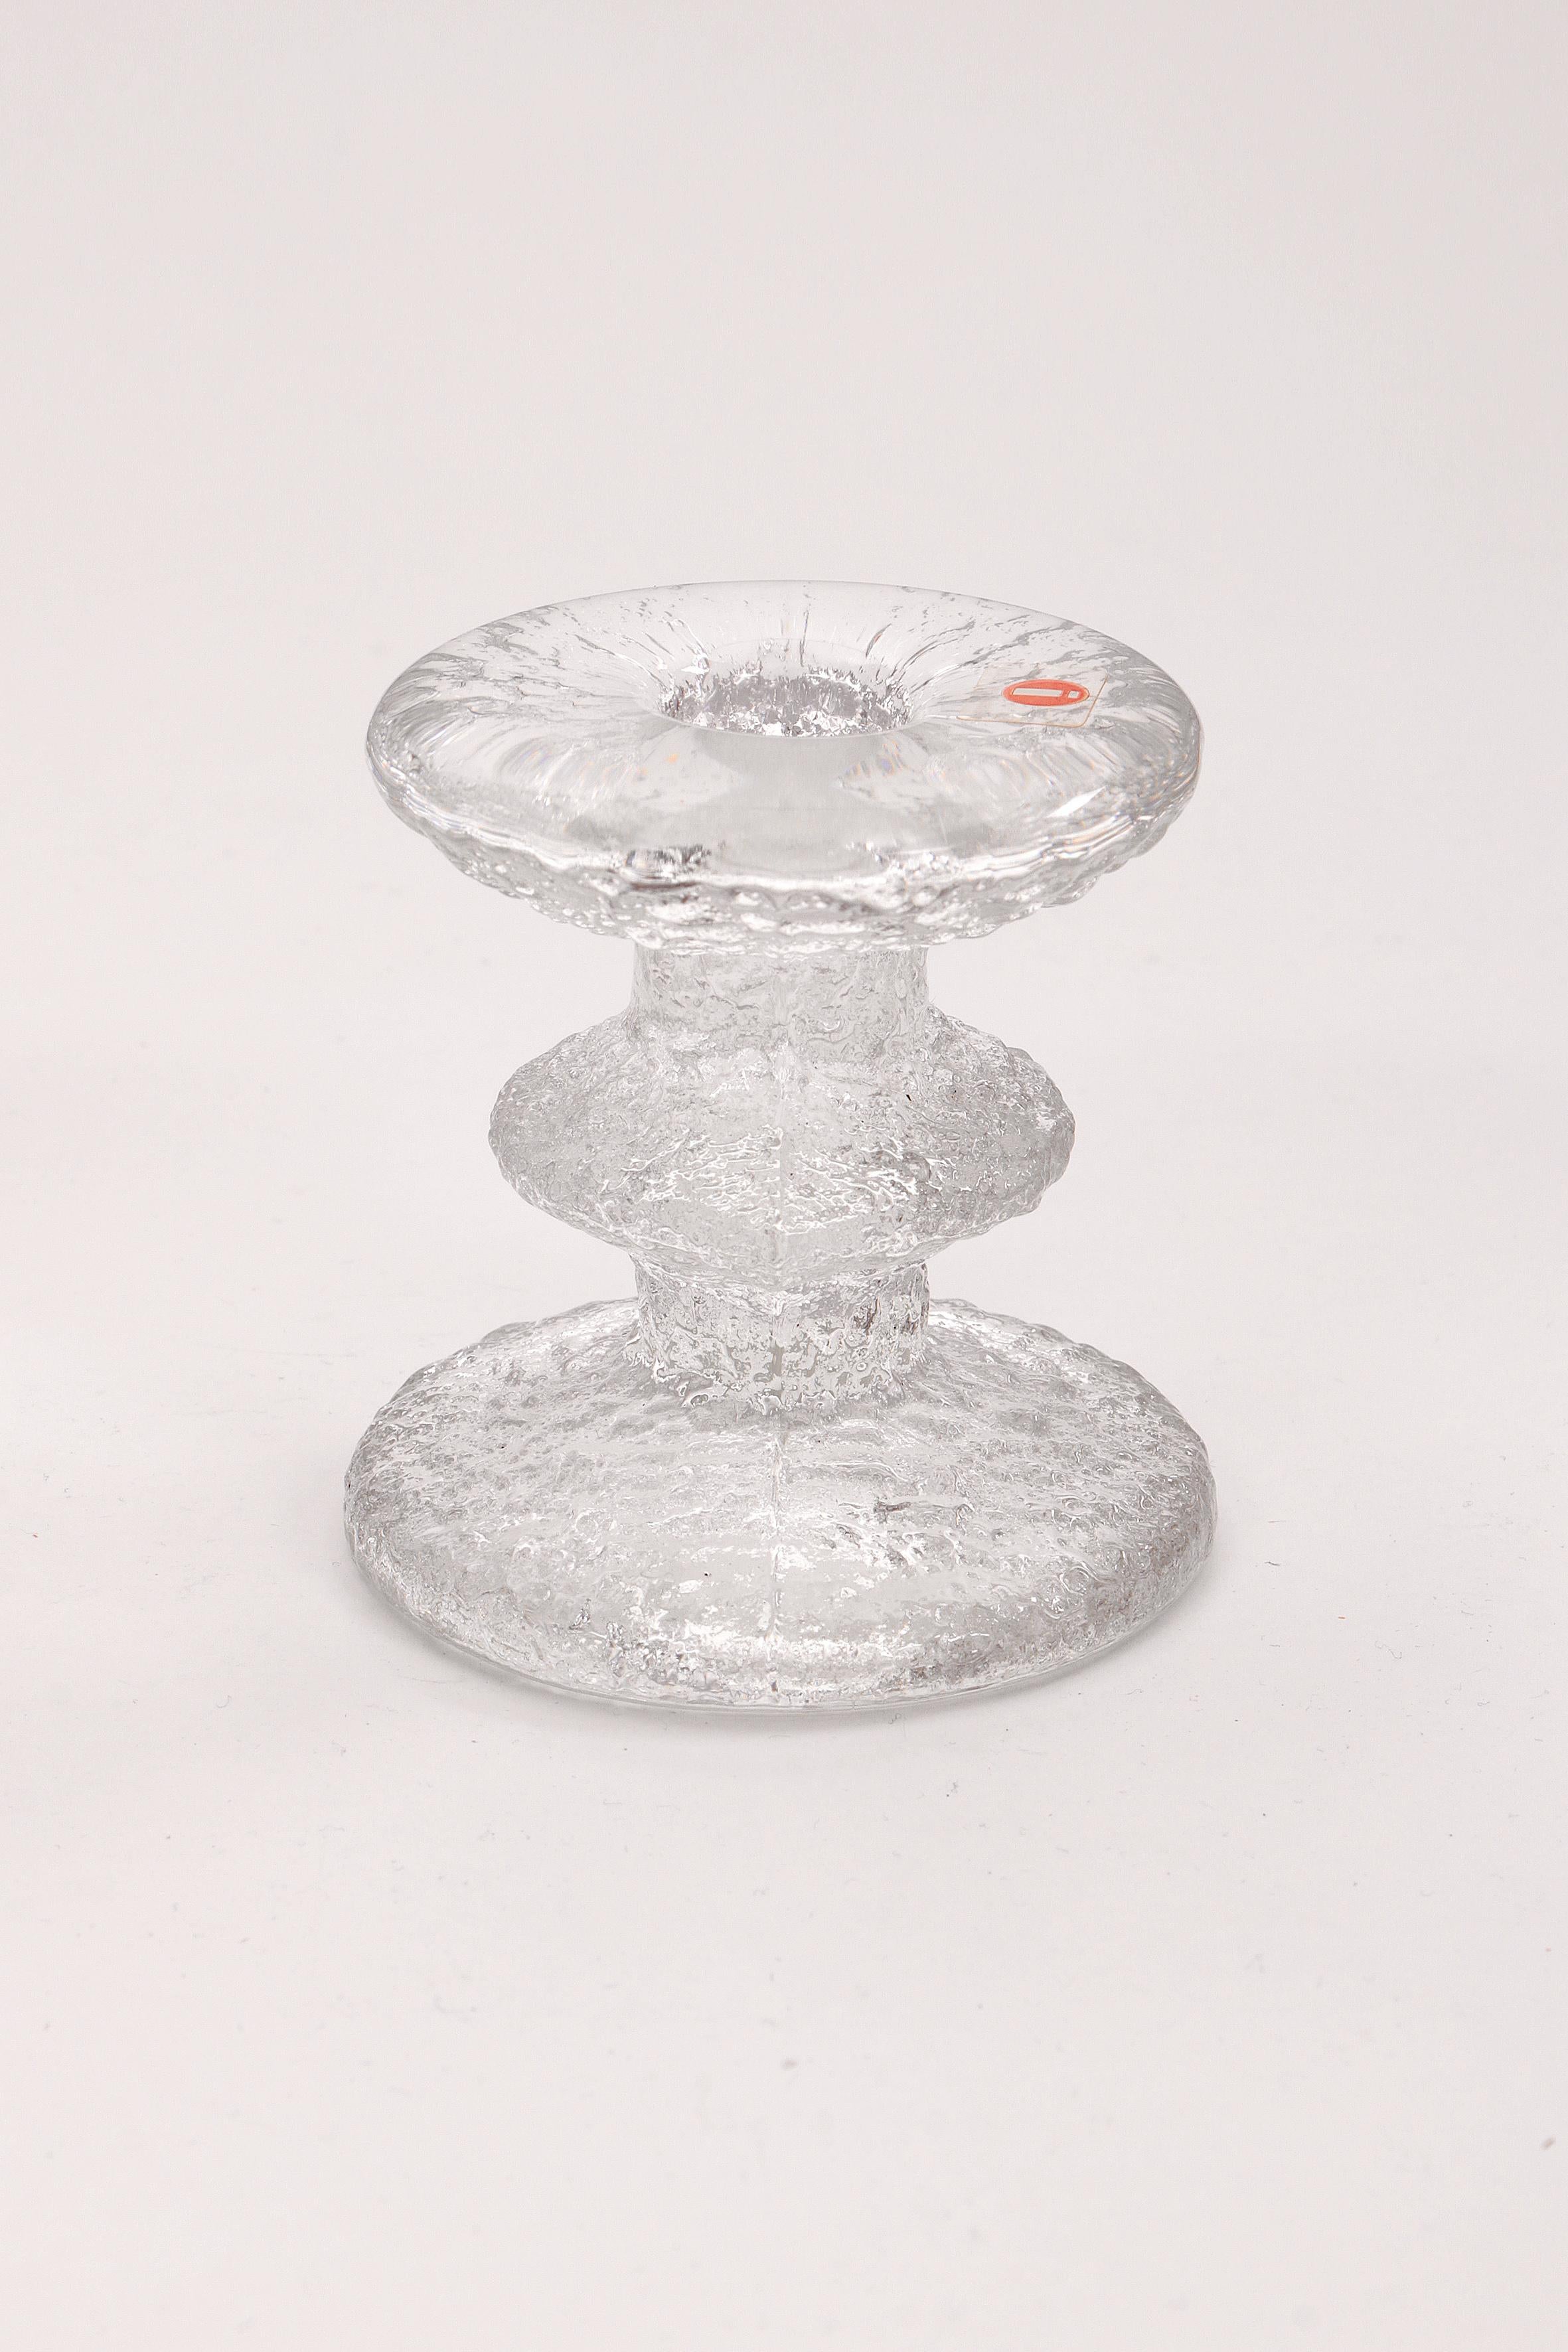 Candlestick Design by Timo Sarpaneva Iittala glass, 1960 Finland In Excellent Condition For Sale In Oostrum-Venray, NL